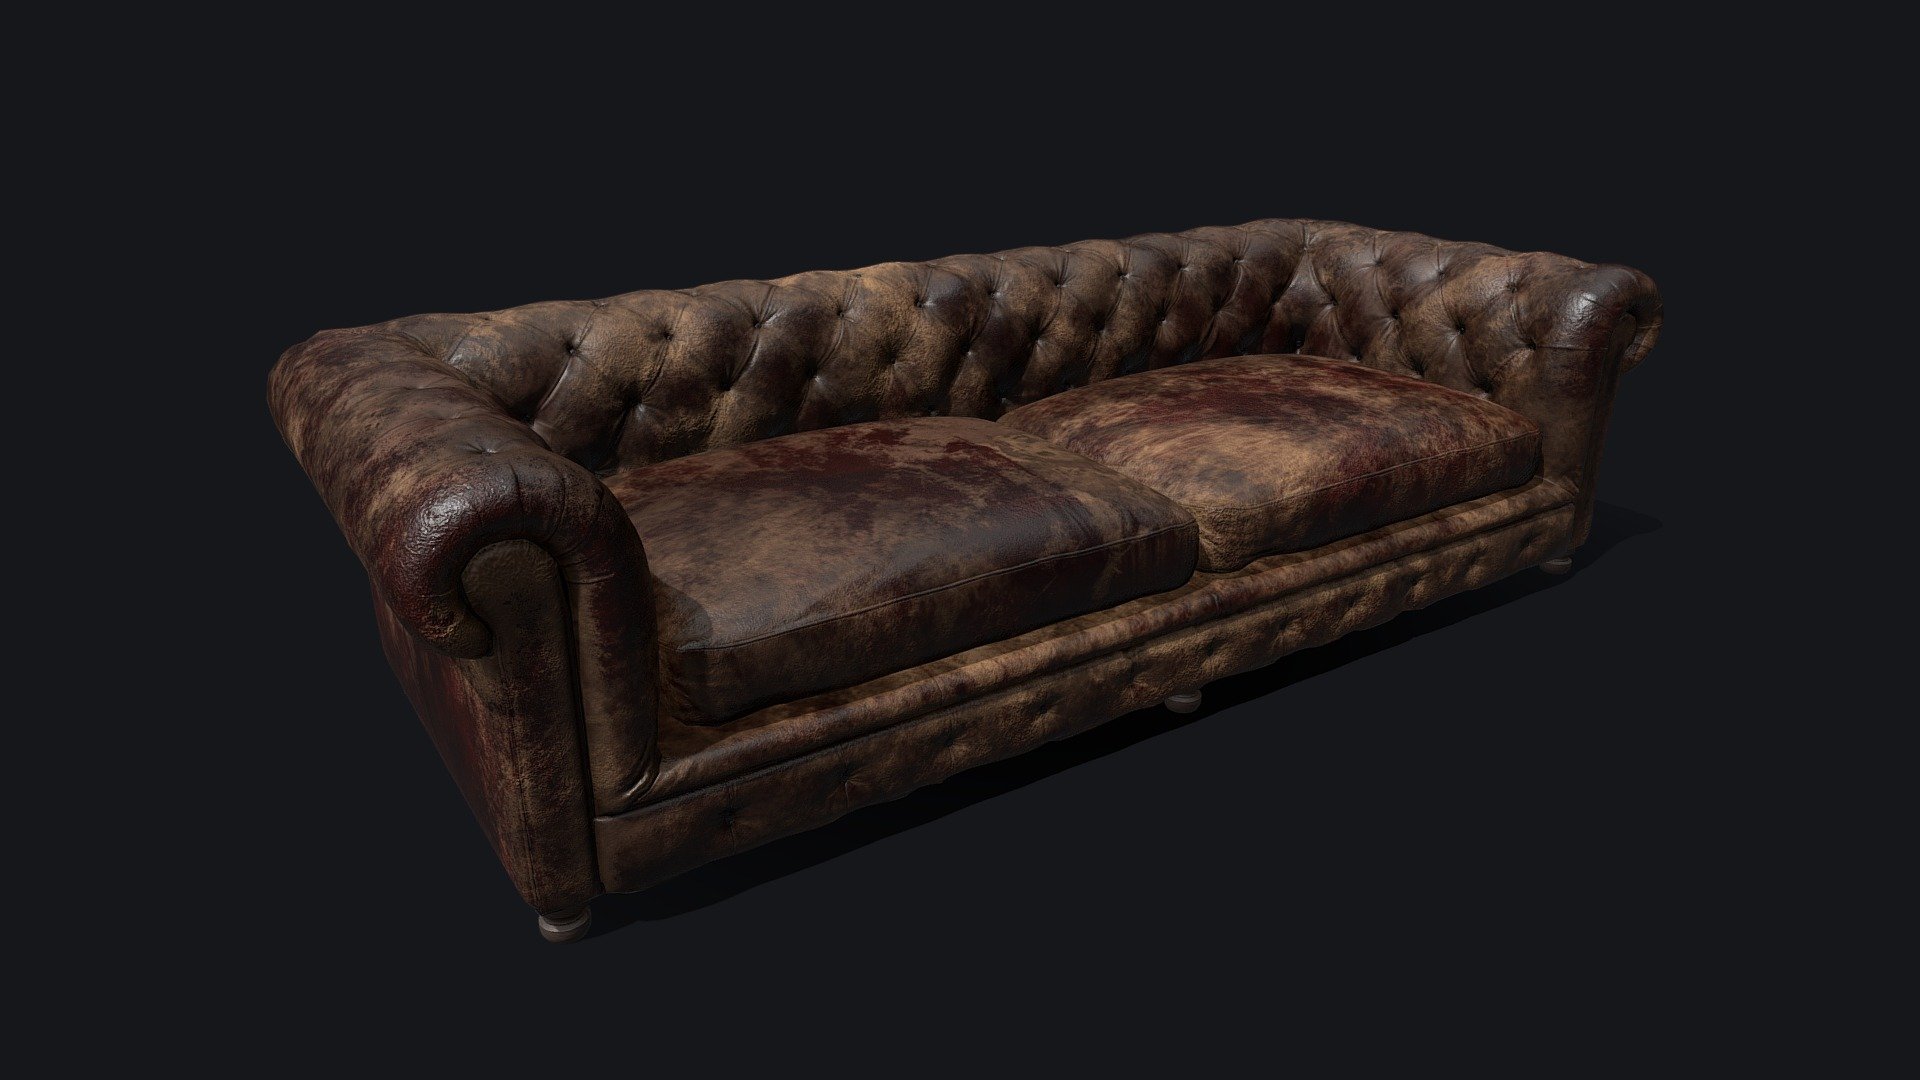 Find Stunning Free 3D Models of Pillows for Download and Viewing